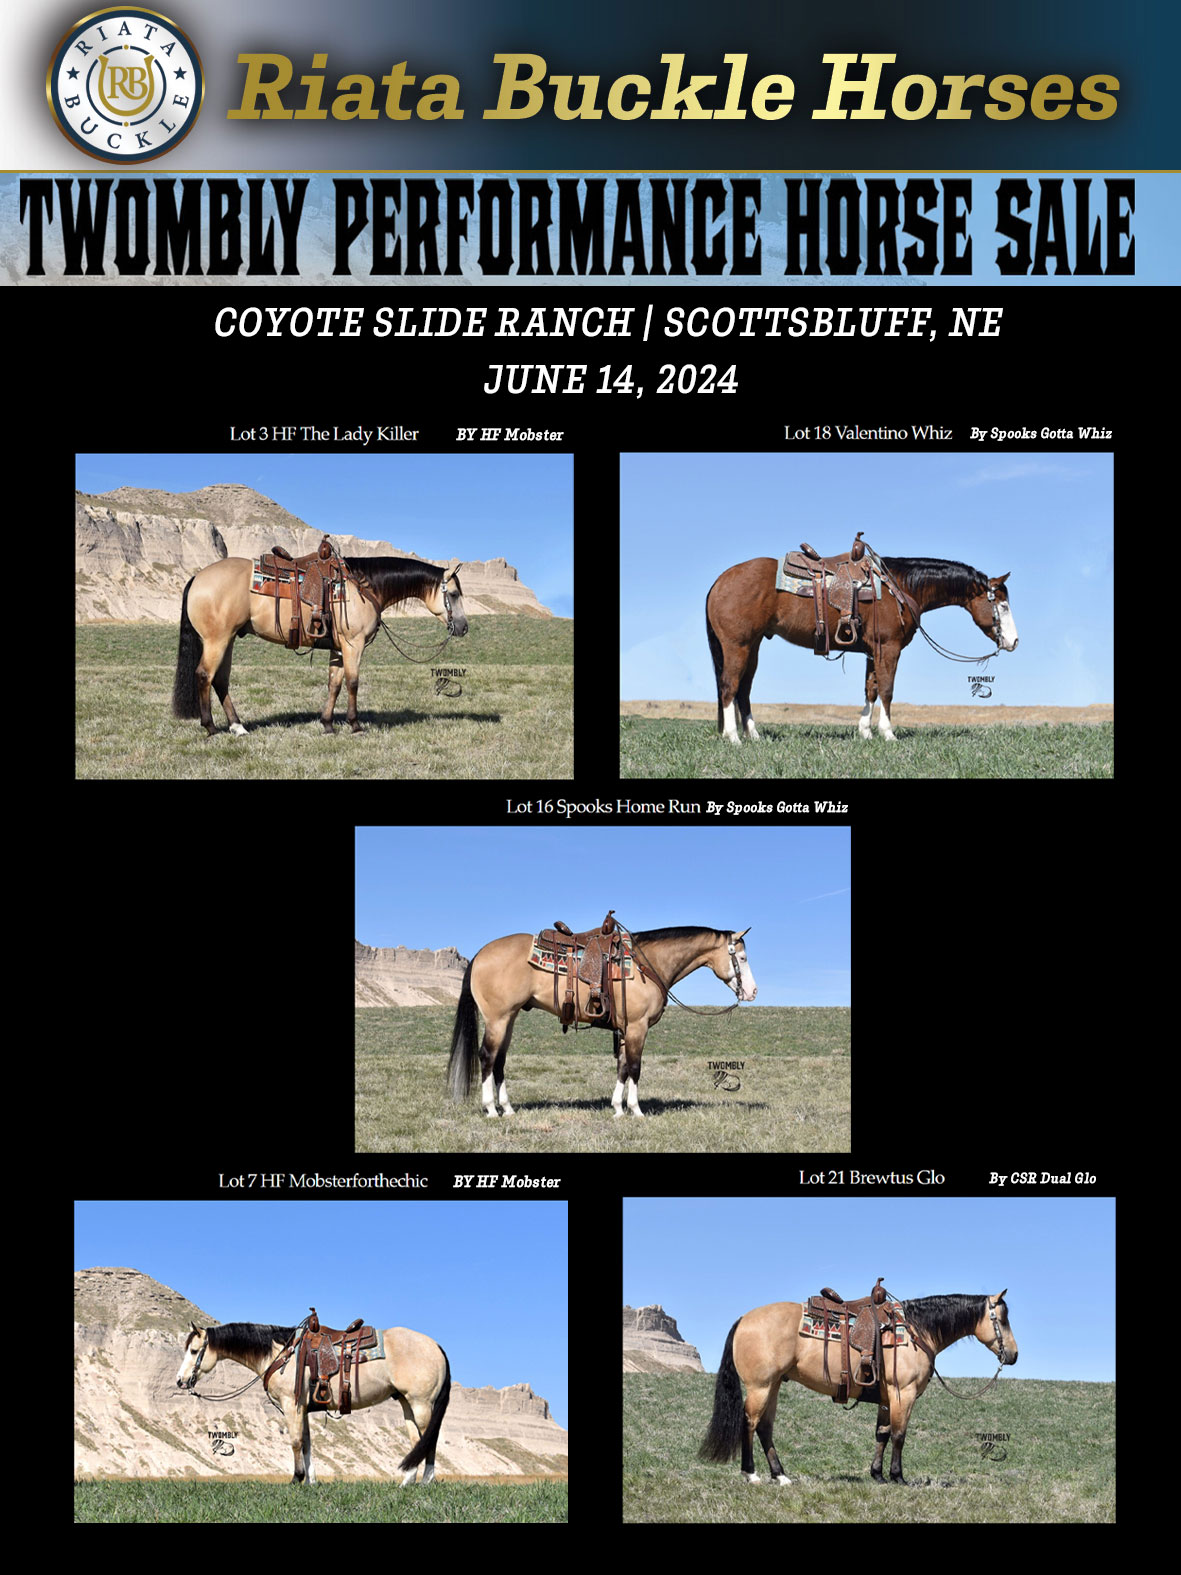 Event Ad for Twombly Performance Horse Sale